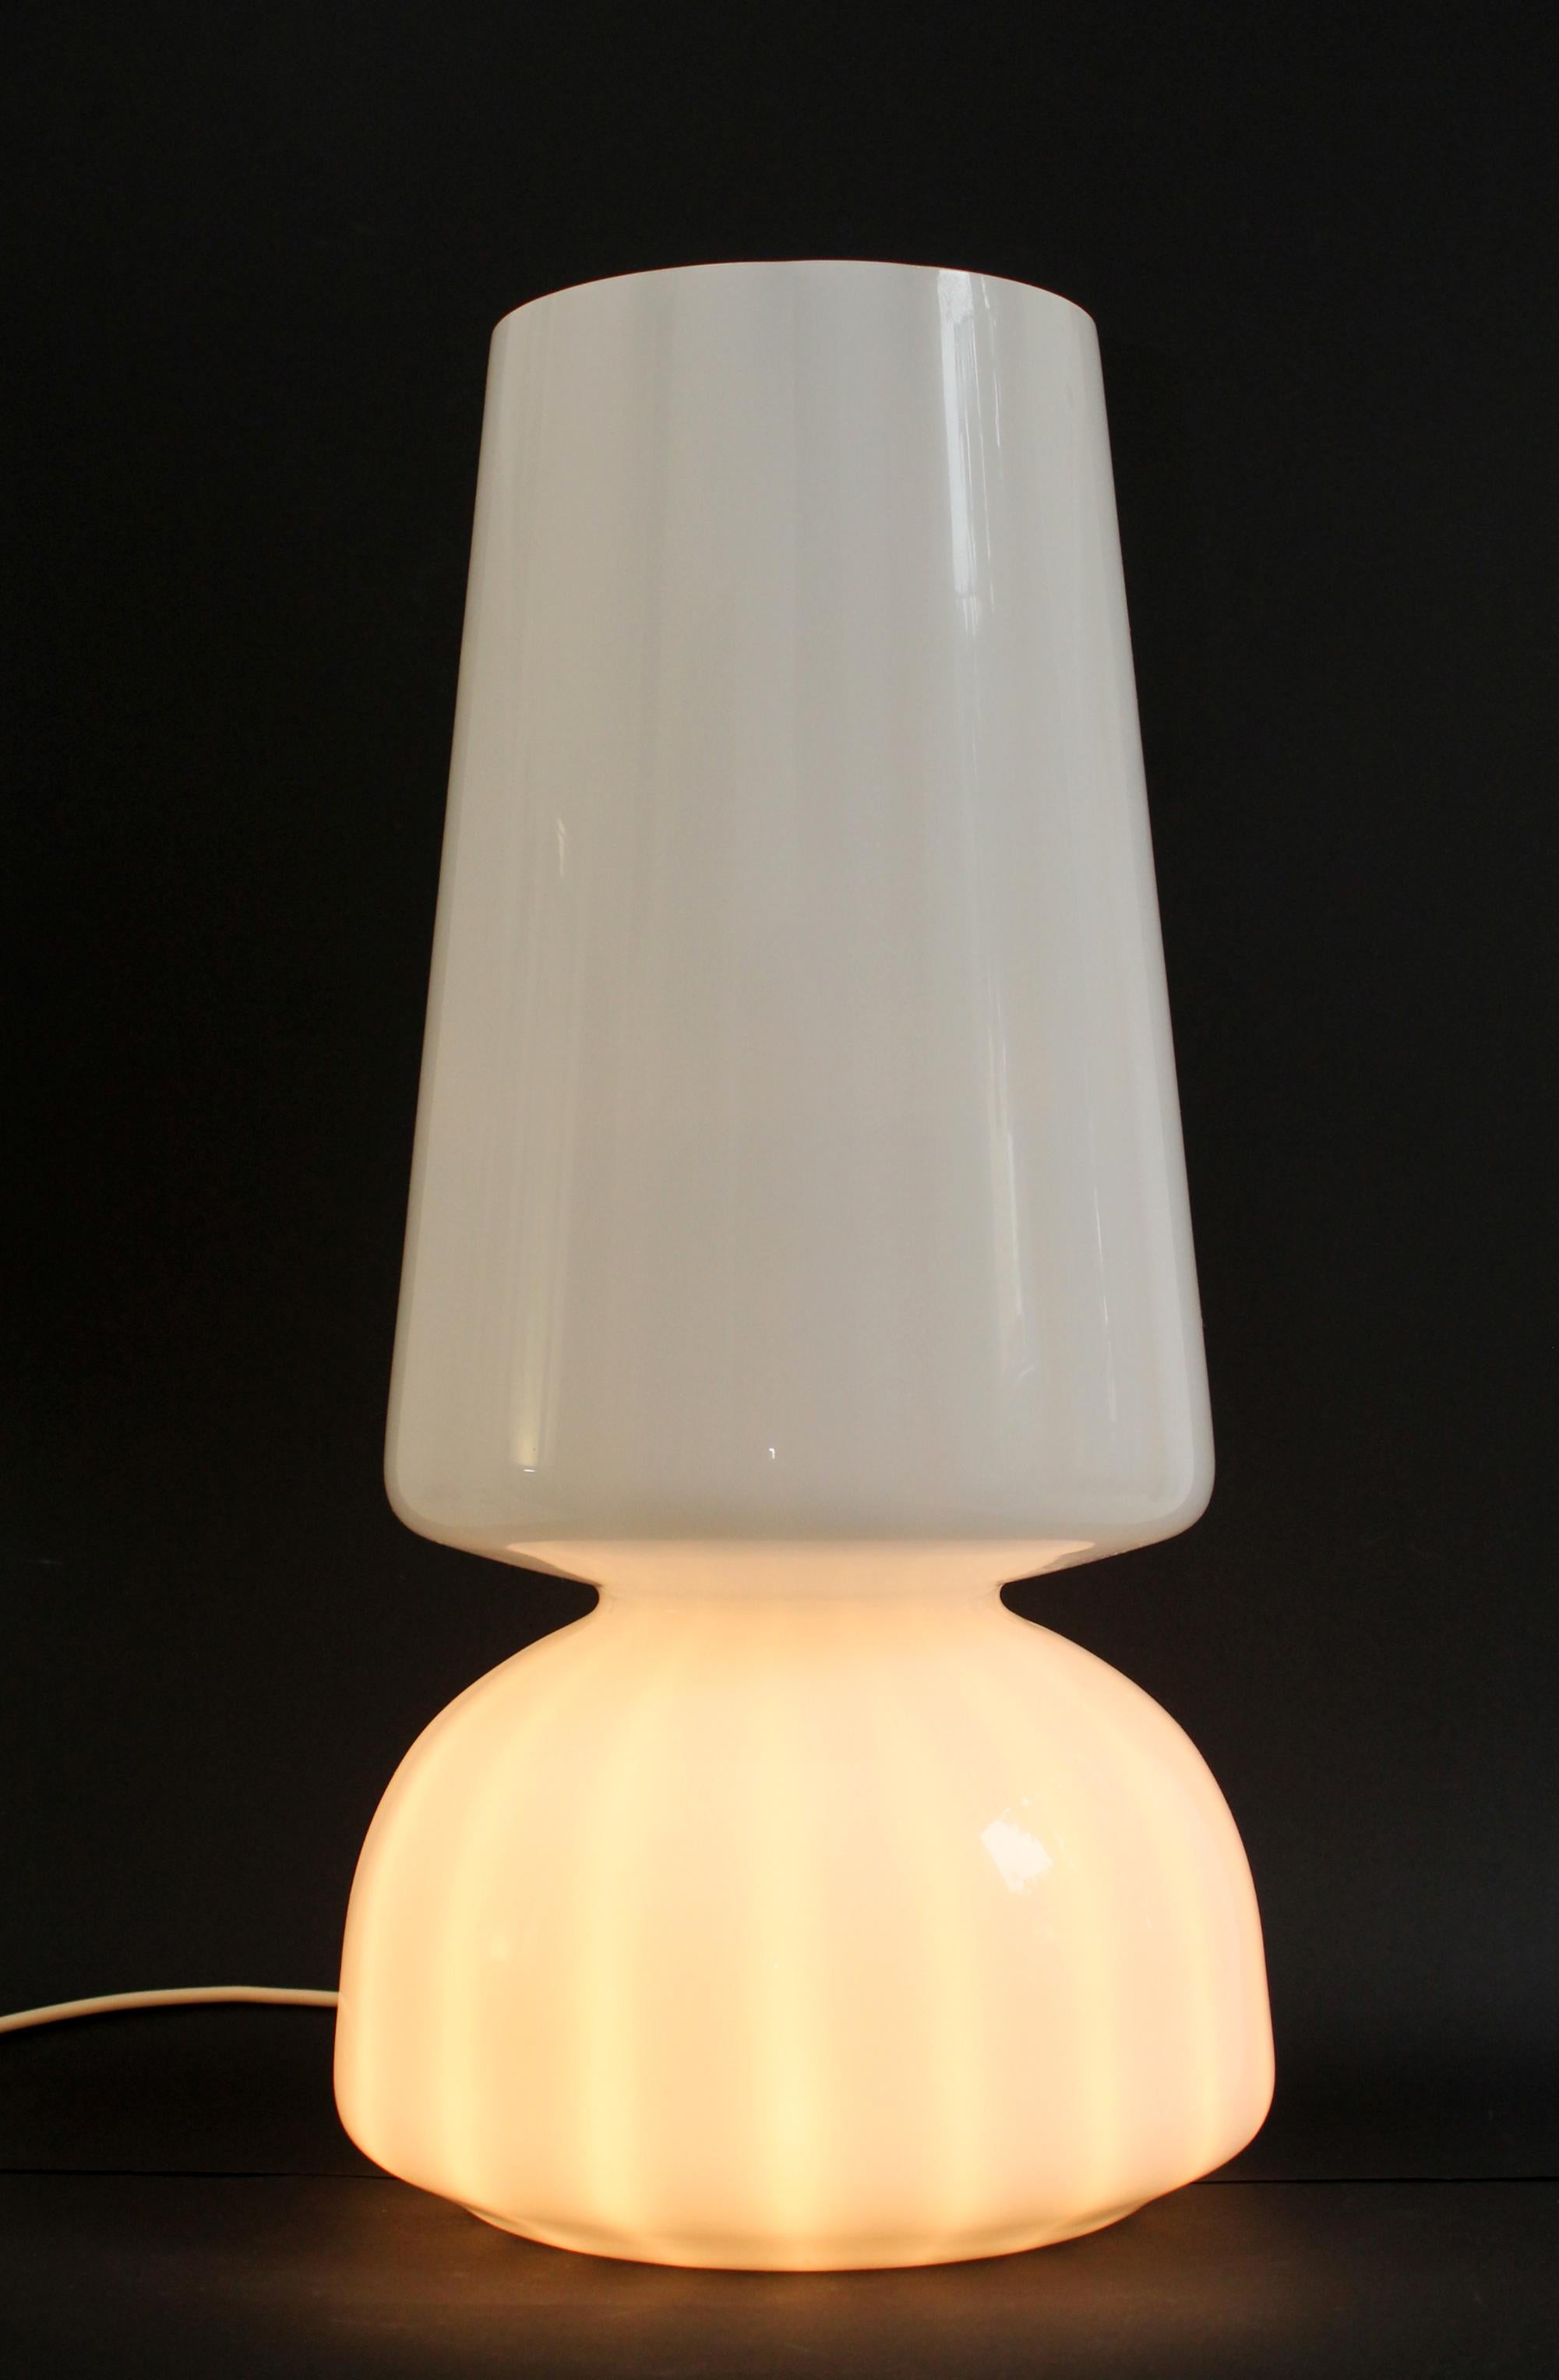 Gorgeous Large Murano Original: VeLuce - Italy.
White Glass Table Lamp from 1970s.
Technique: made of a single sheet of molded Murano glass.
Measurements (cm): 60 height x30 base diameter x 20 top diameter).
Double sockets (E27 + E14) - Bulbs